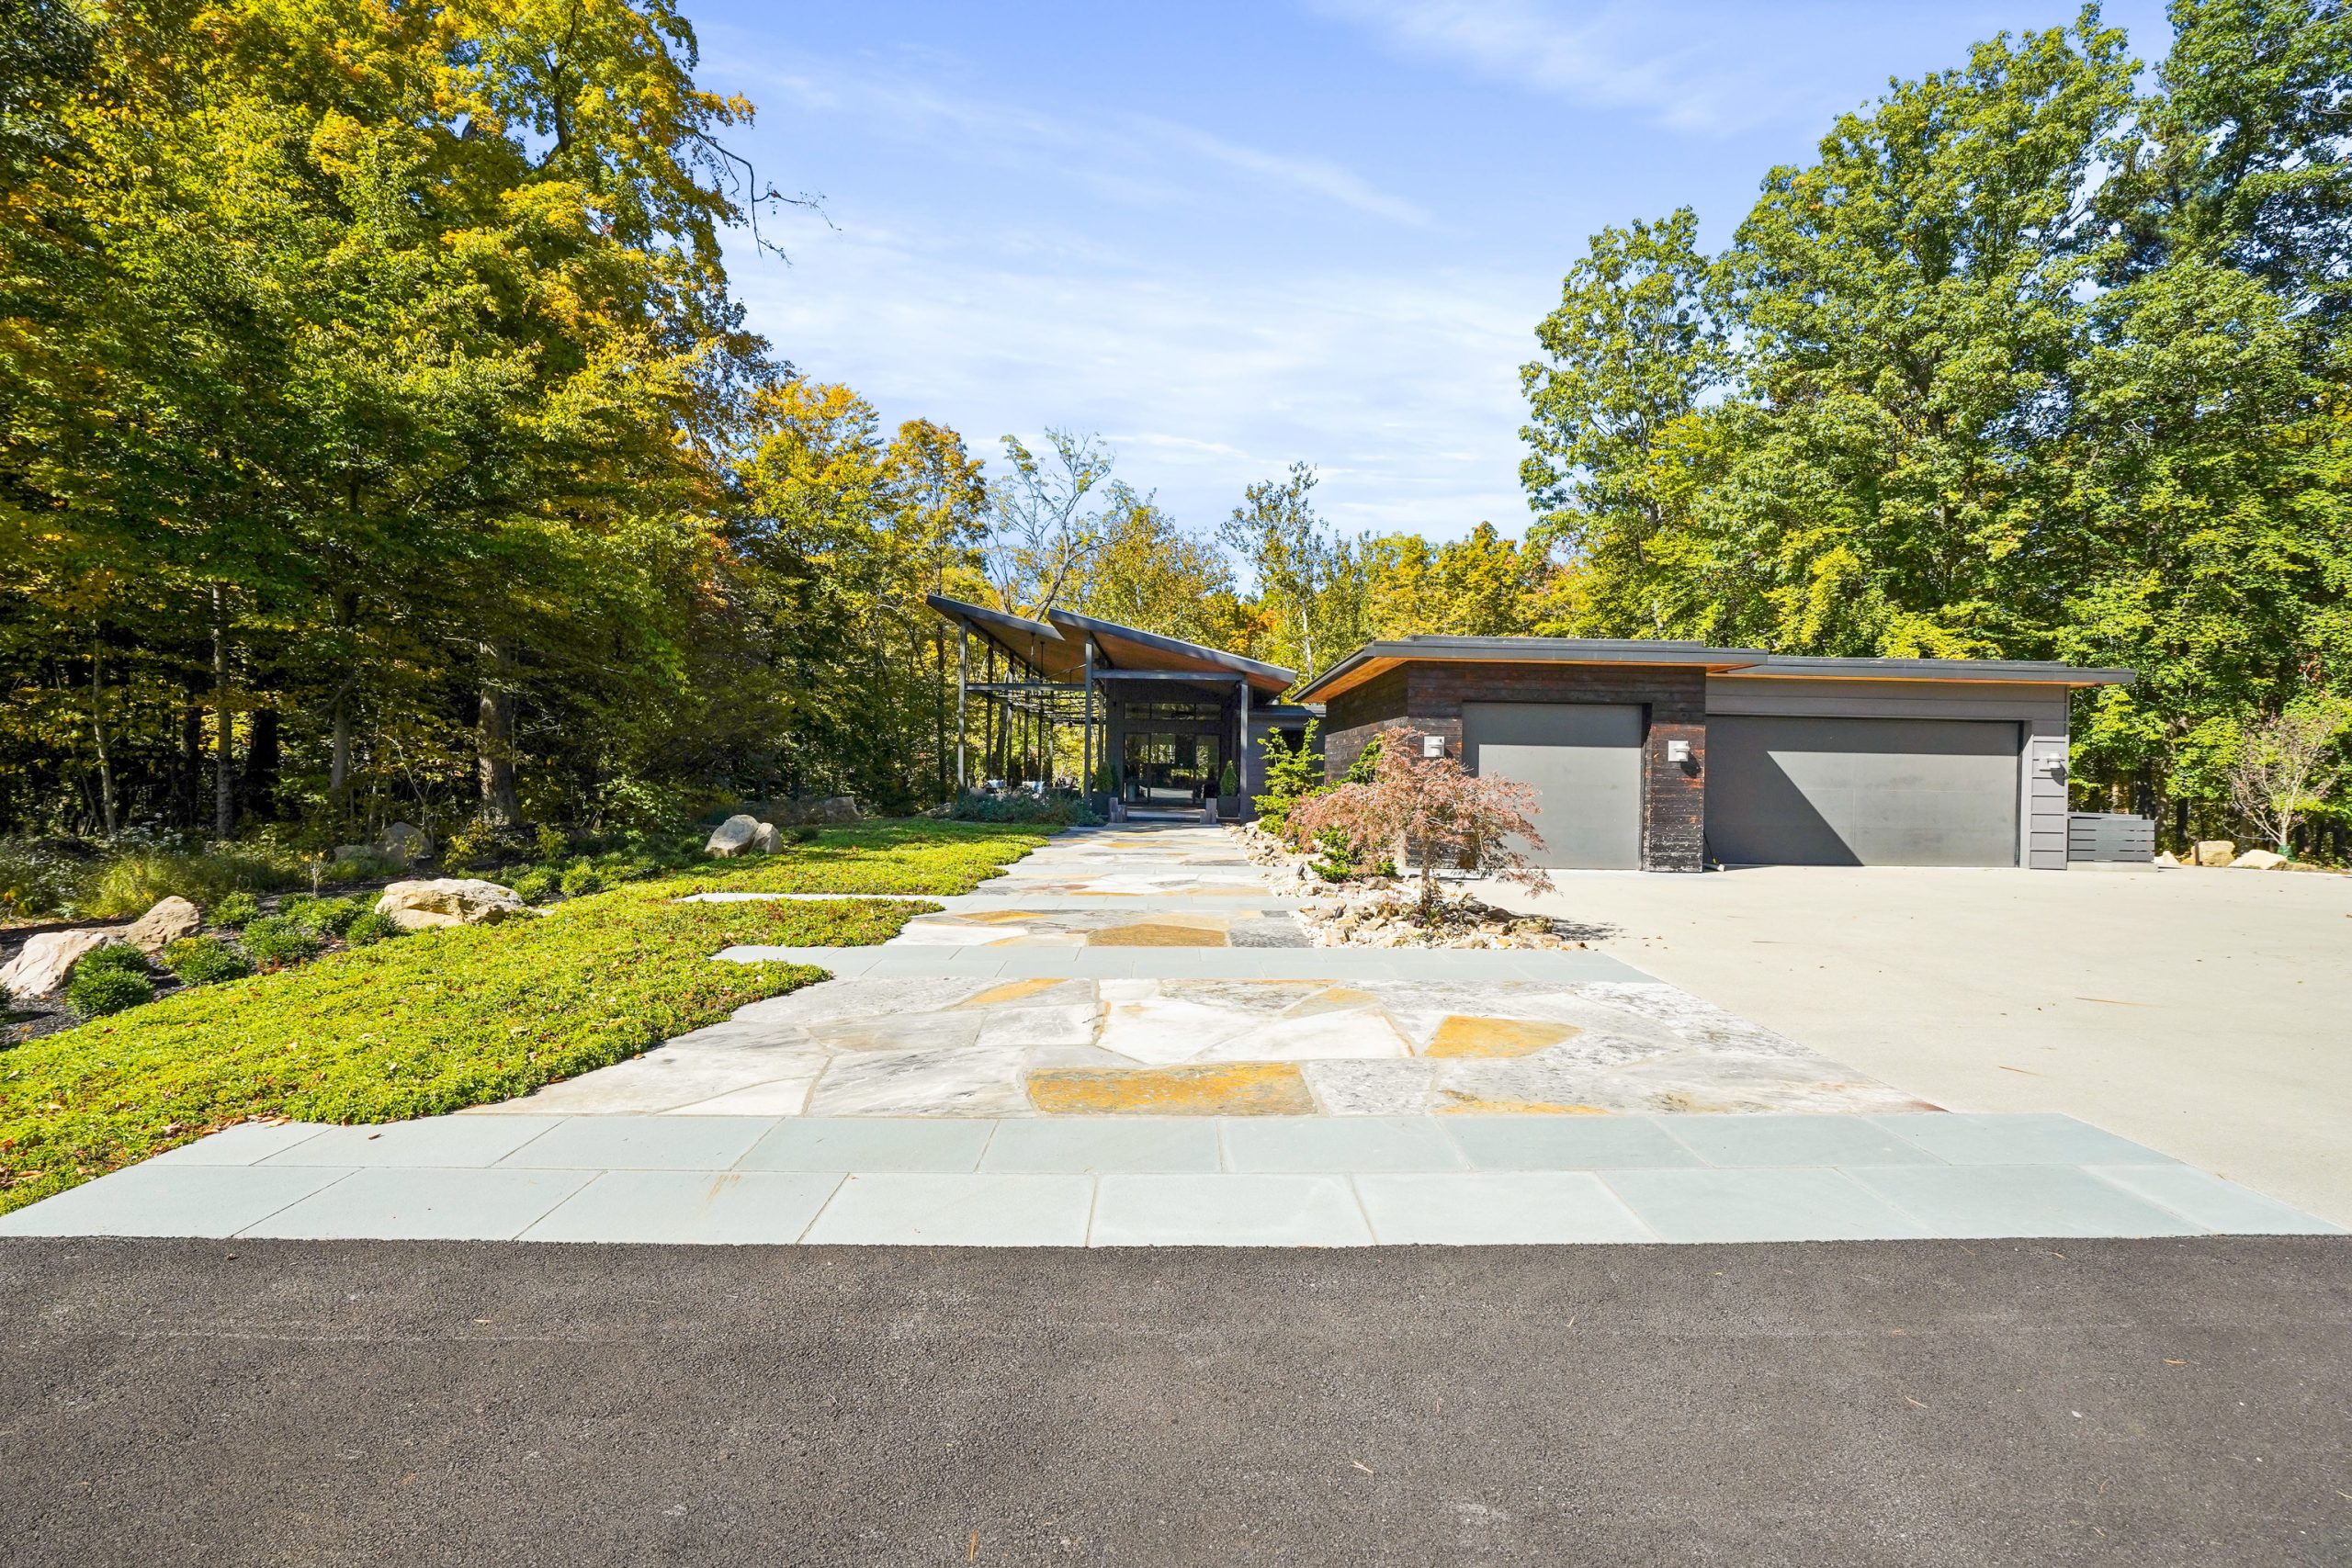 Full view of driveway to a home surrounded by colorful trees.